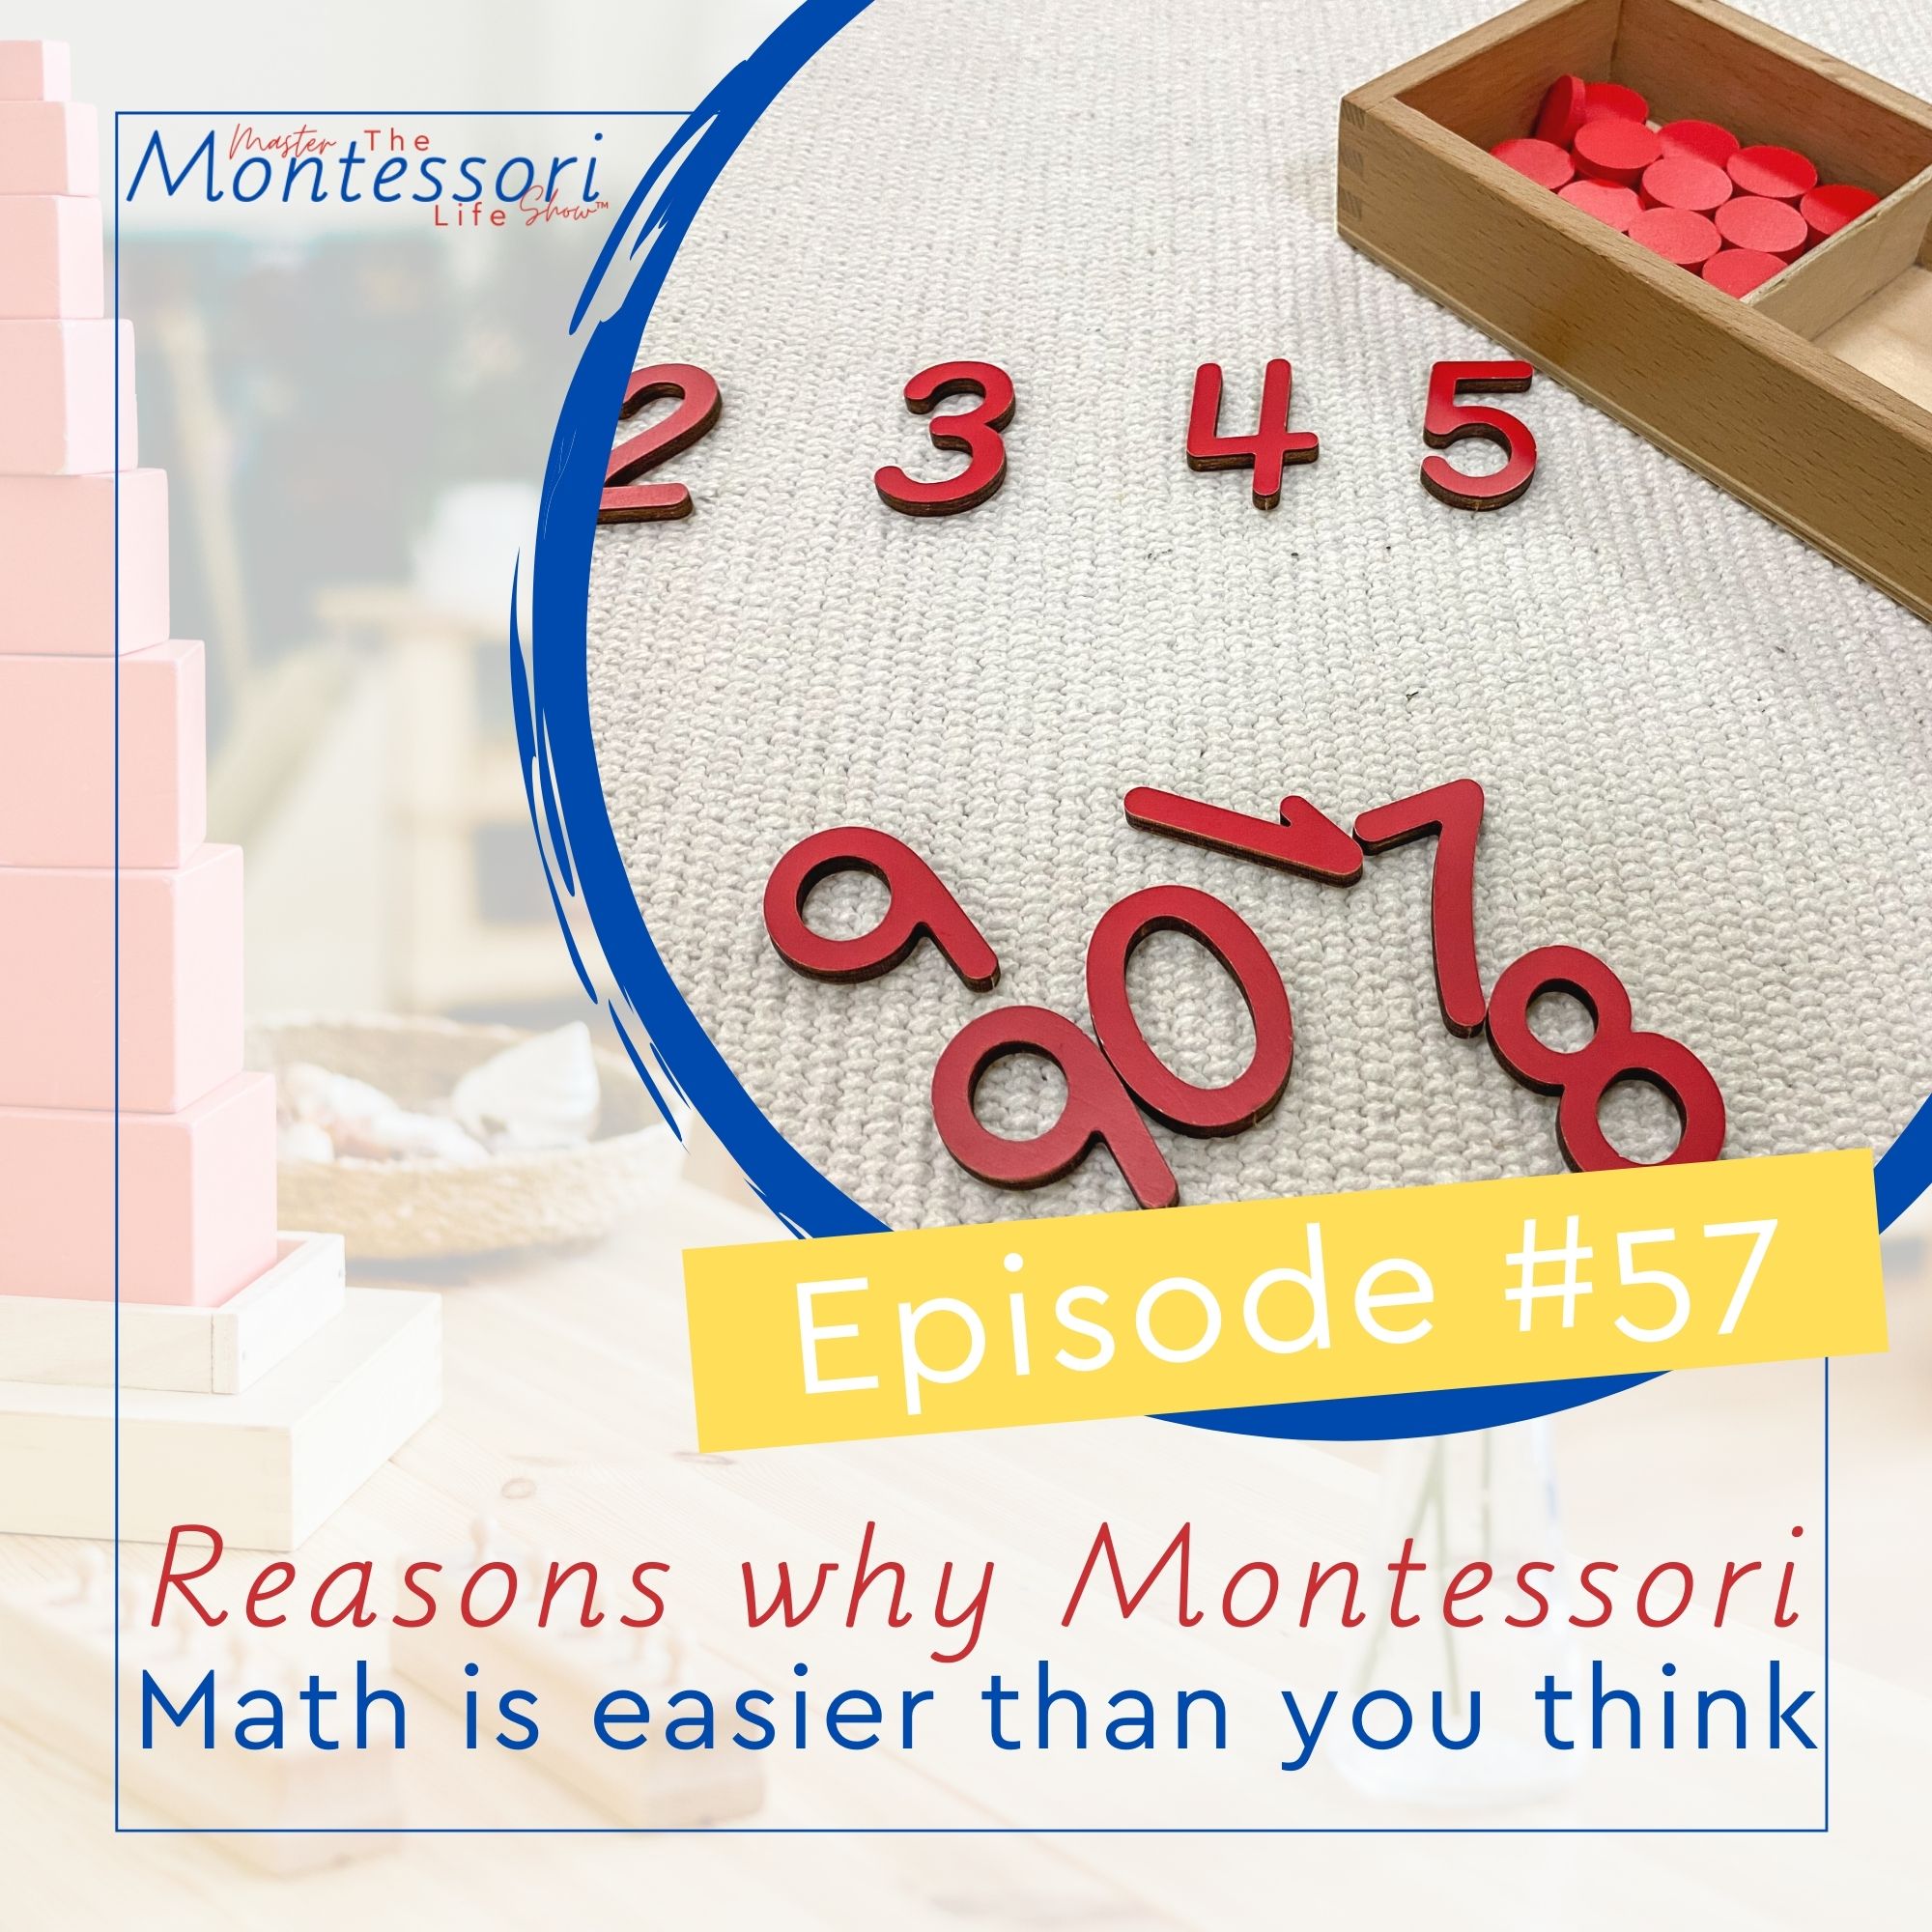 Episode 57: Reasons why Montessori Math is easier than you think